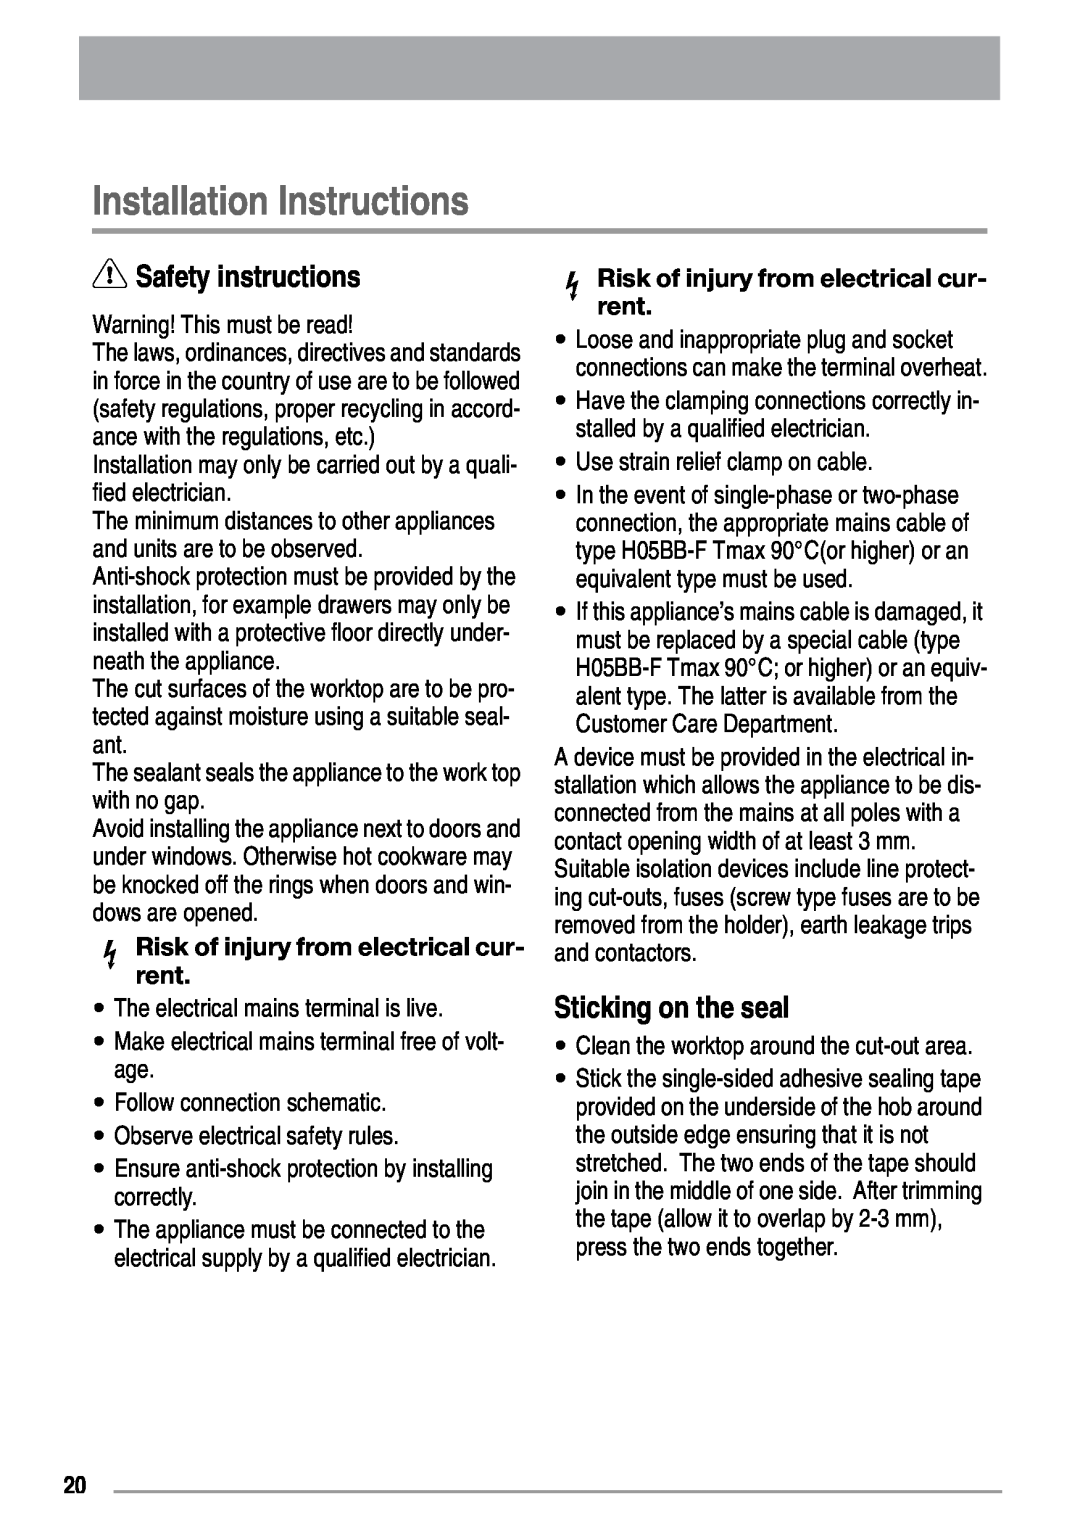 Zanussi ZVH 66 F manual Installation Instructions, Safety instructions, Sticking on the seal 